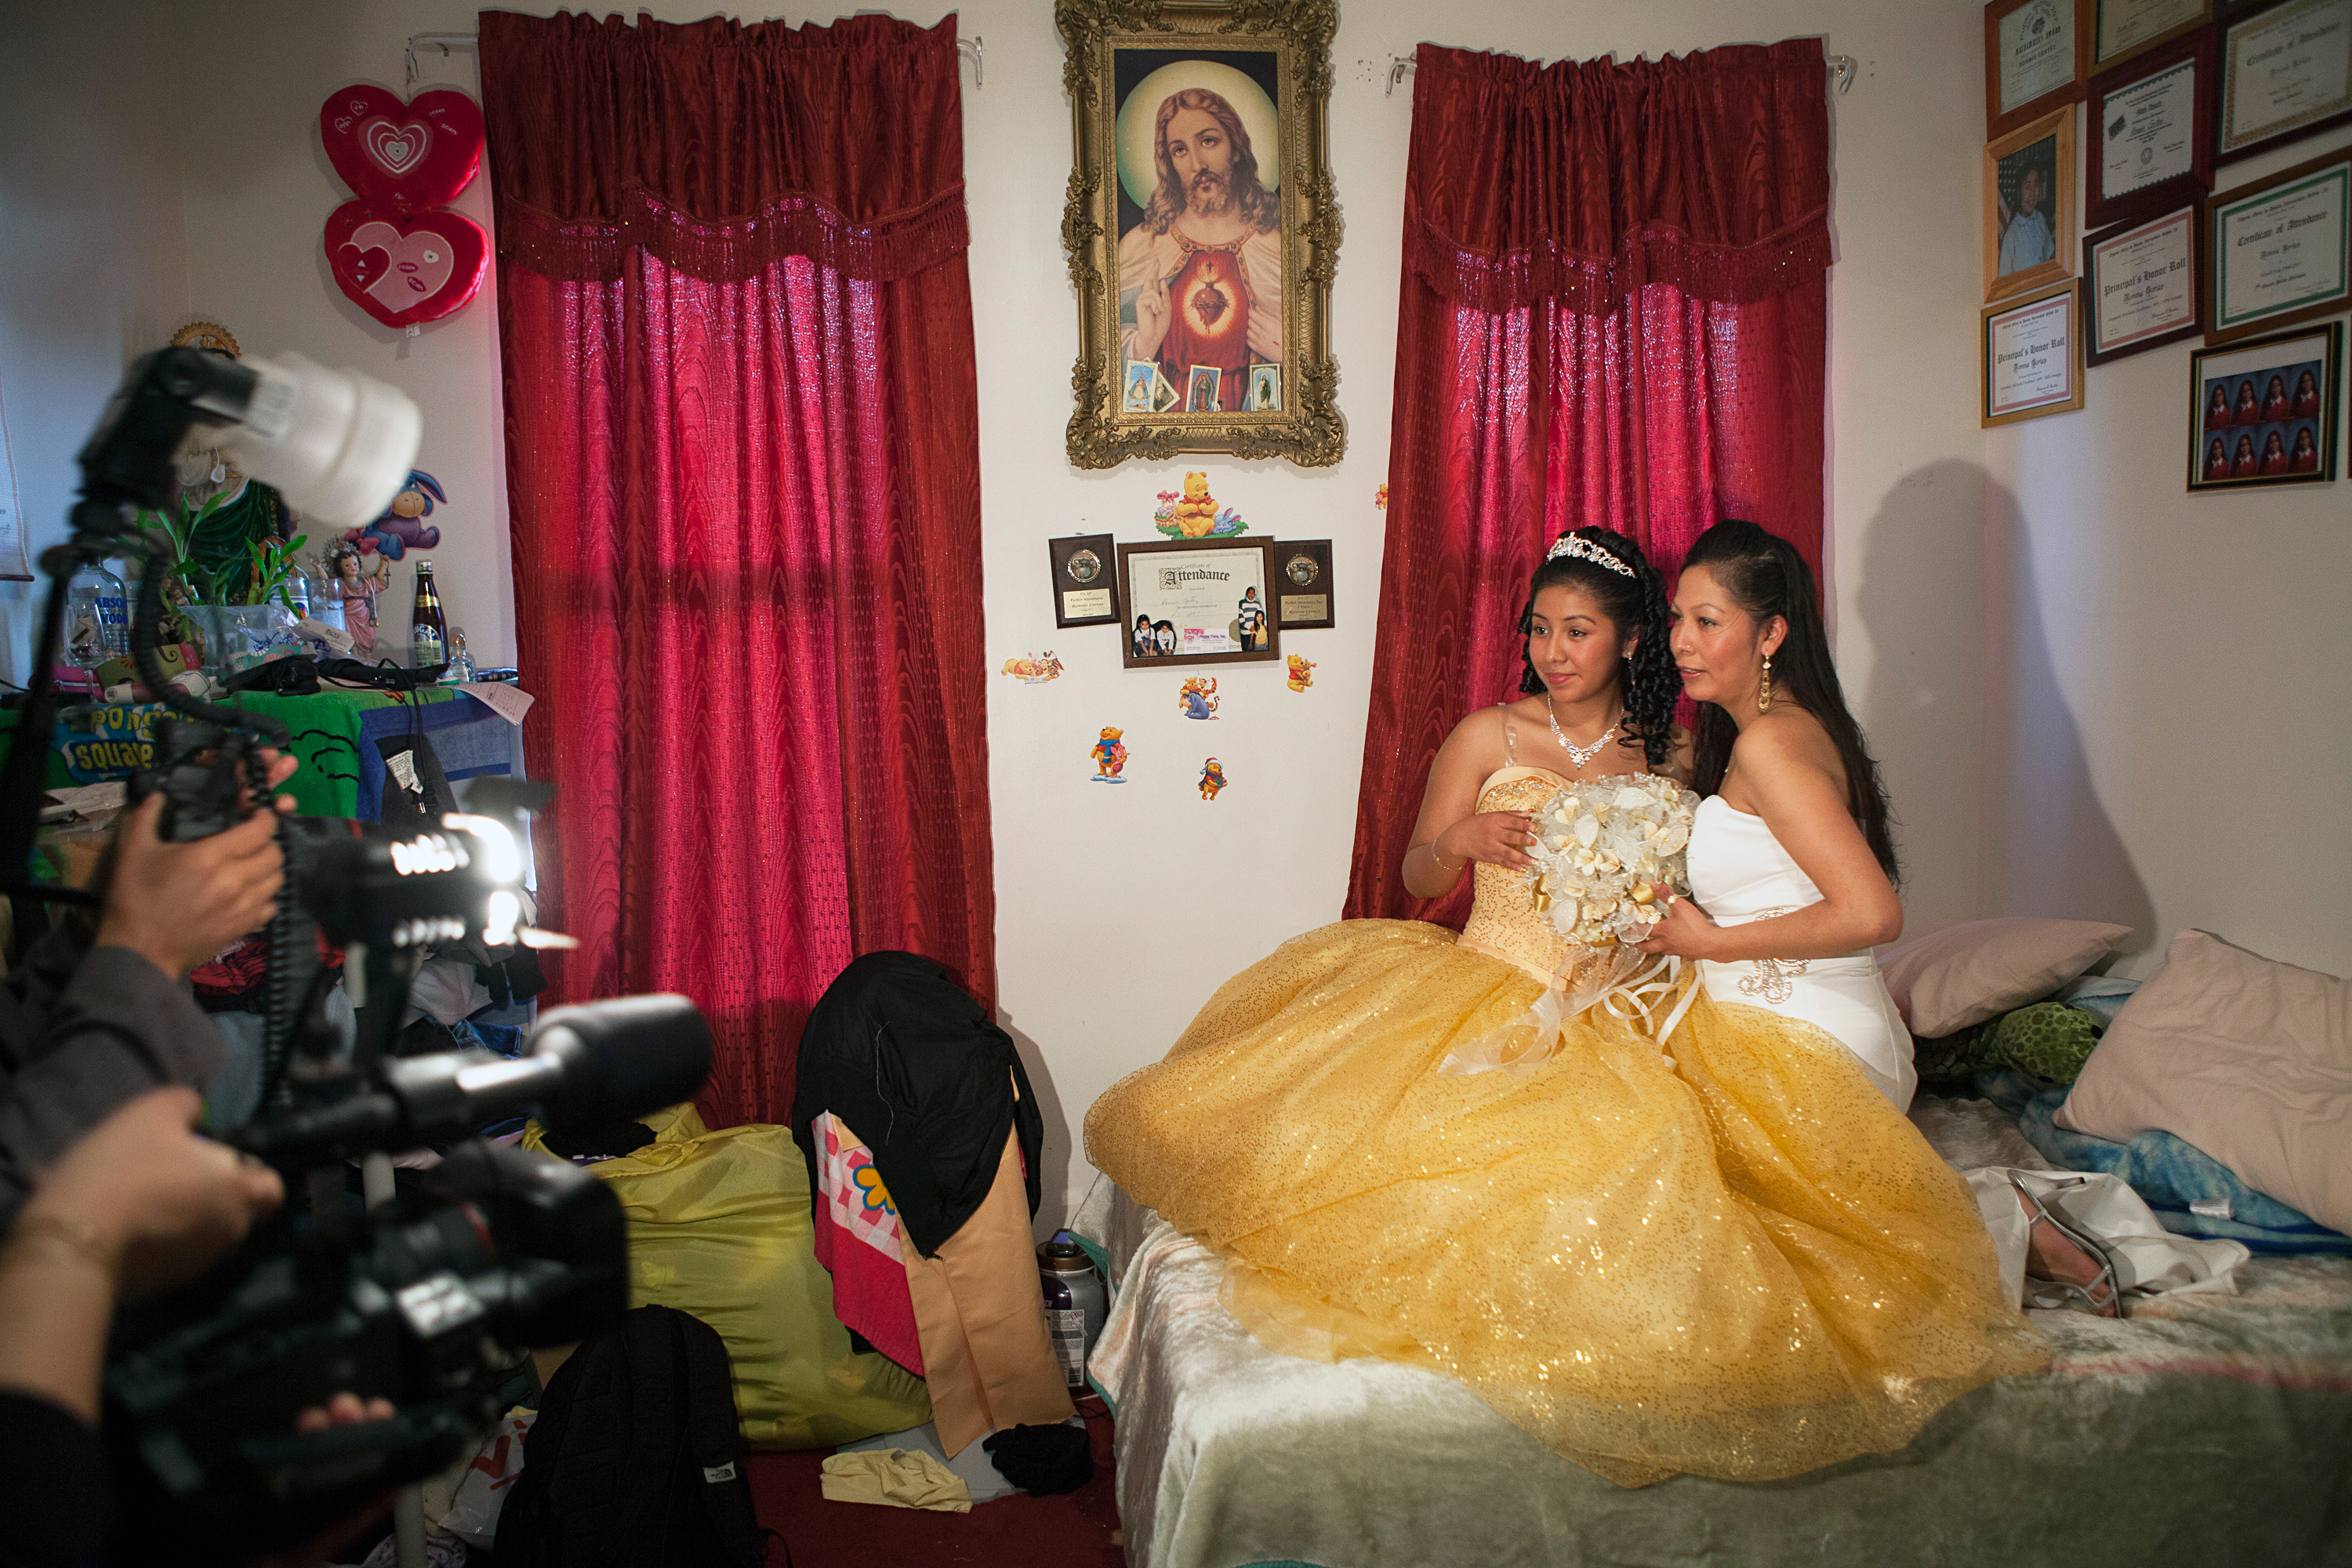 <strong>More than 400,000 Hispanic girls celebrated quinceañeras in 2011. Each family spent an average of $5,000 to $10,000, adding up to a $2 million- to $4 million-dollar industry, states <a href="http://corporate.univision.com/2011/09/latina-moms-and-the-quinceanera-tradition/" title="Univision – Latina Moms and the Quinceañera Tradition" target="_blank">Univision Communications.</a></strong>
                                          
                                          Title: "Ronnie and her mom pose for a photographer and videographer they've hired to document Ronnie's Quinceañera, Brooklyn, NY," from the series <em><a href="http://www.rebeccagreenfield.com/#a=0&amp;at=0&amp;mi=2&amp;pt=1&amp;pi=10000&amp;s=0&amp;p=5" title="Coming of Age" target="_blank">Coming of Age.</a></em>
                                          
                                          